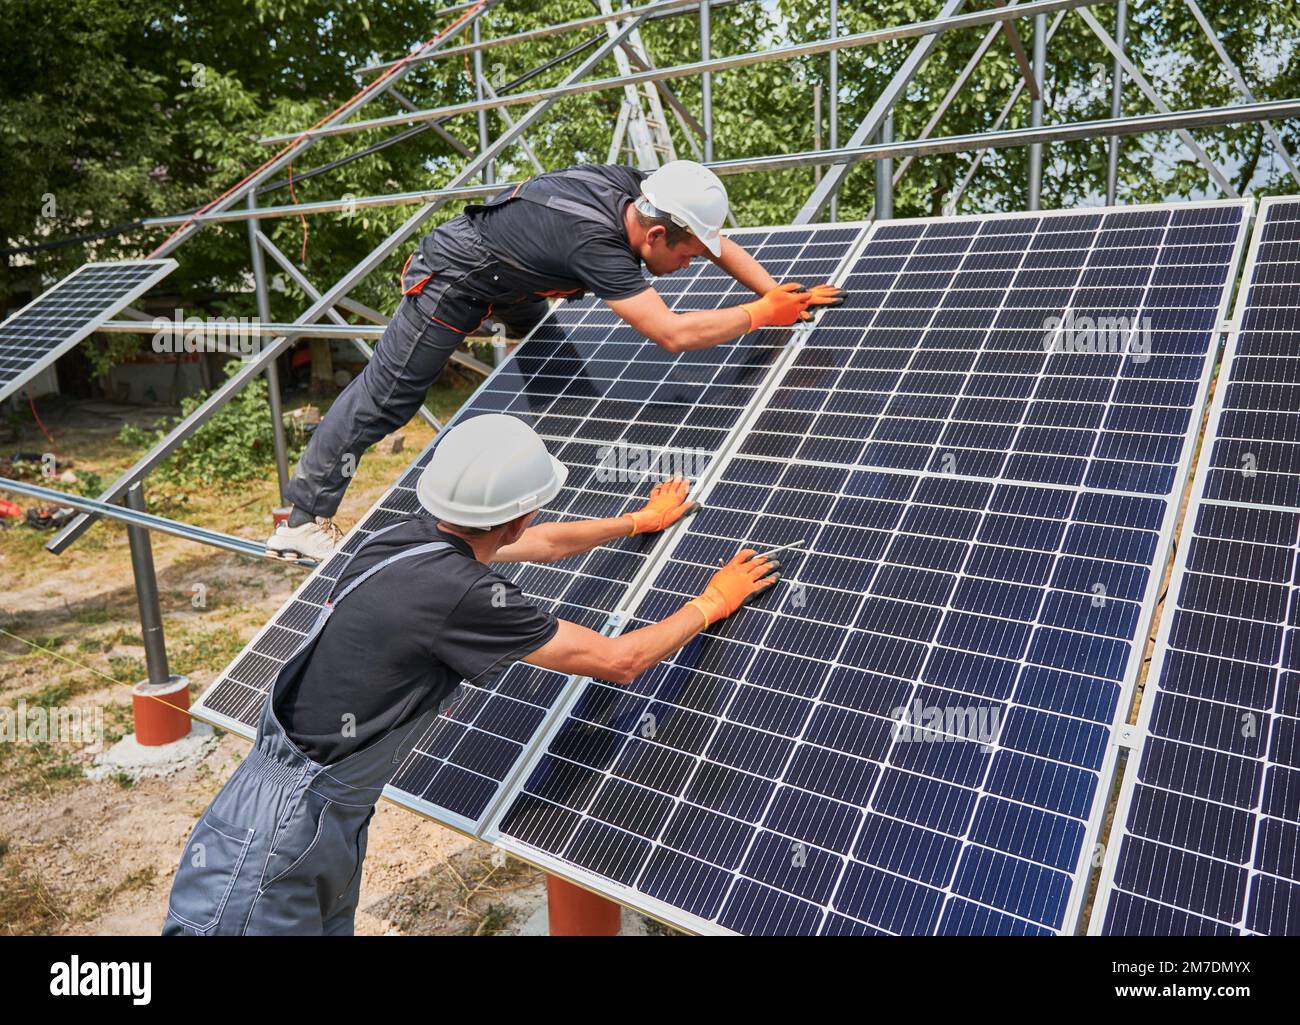 Workers installing photovoltaic solar panel system outdoors. Men engineers placing solar module on metal rails, wearing construction helmets and work gloves. Renewable and ecological energy. Stock Photo